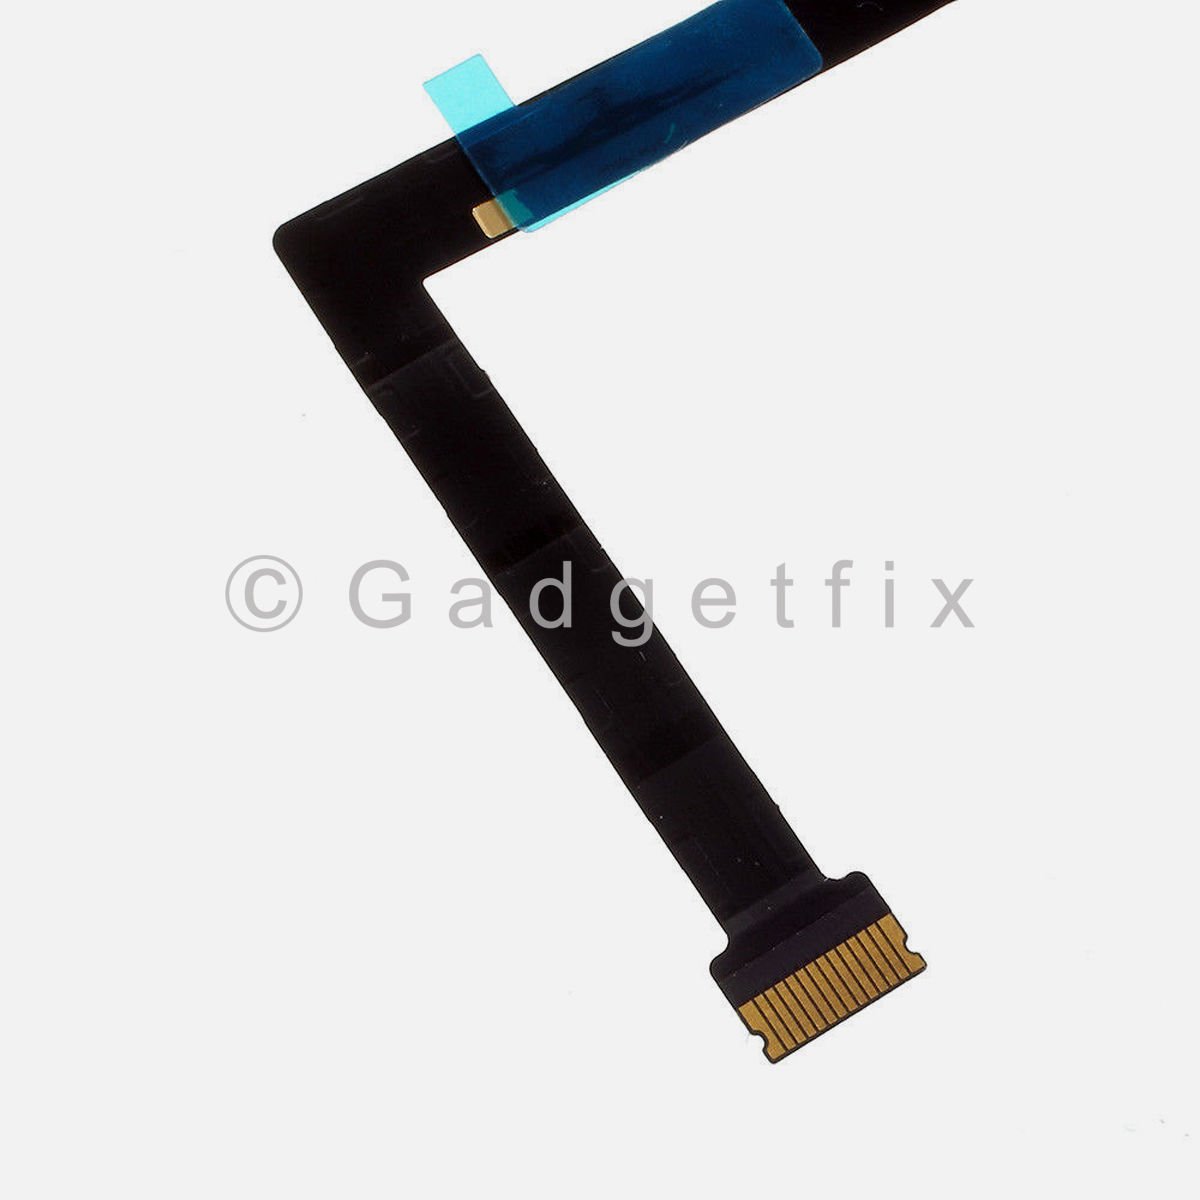 Home Button Key Button Cable For iPad 5th Gen 9.7" 2017 A1822 A1823 